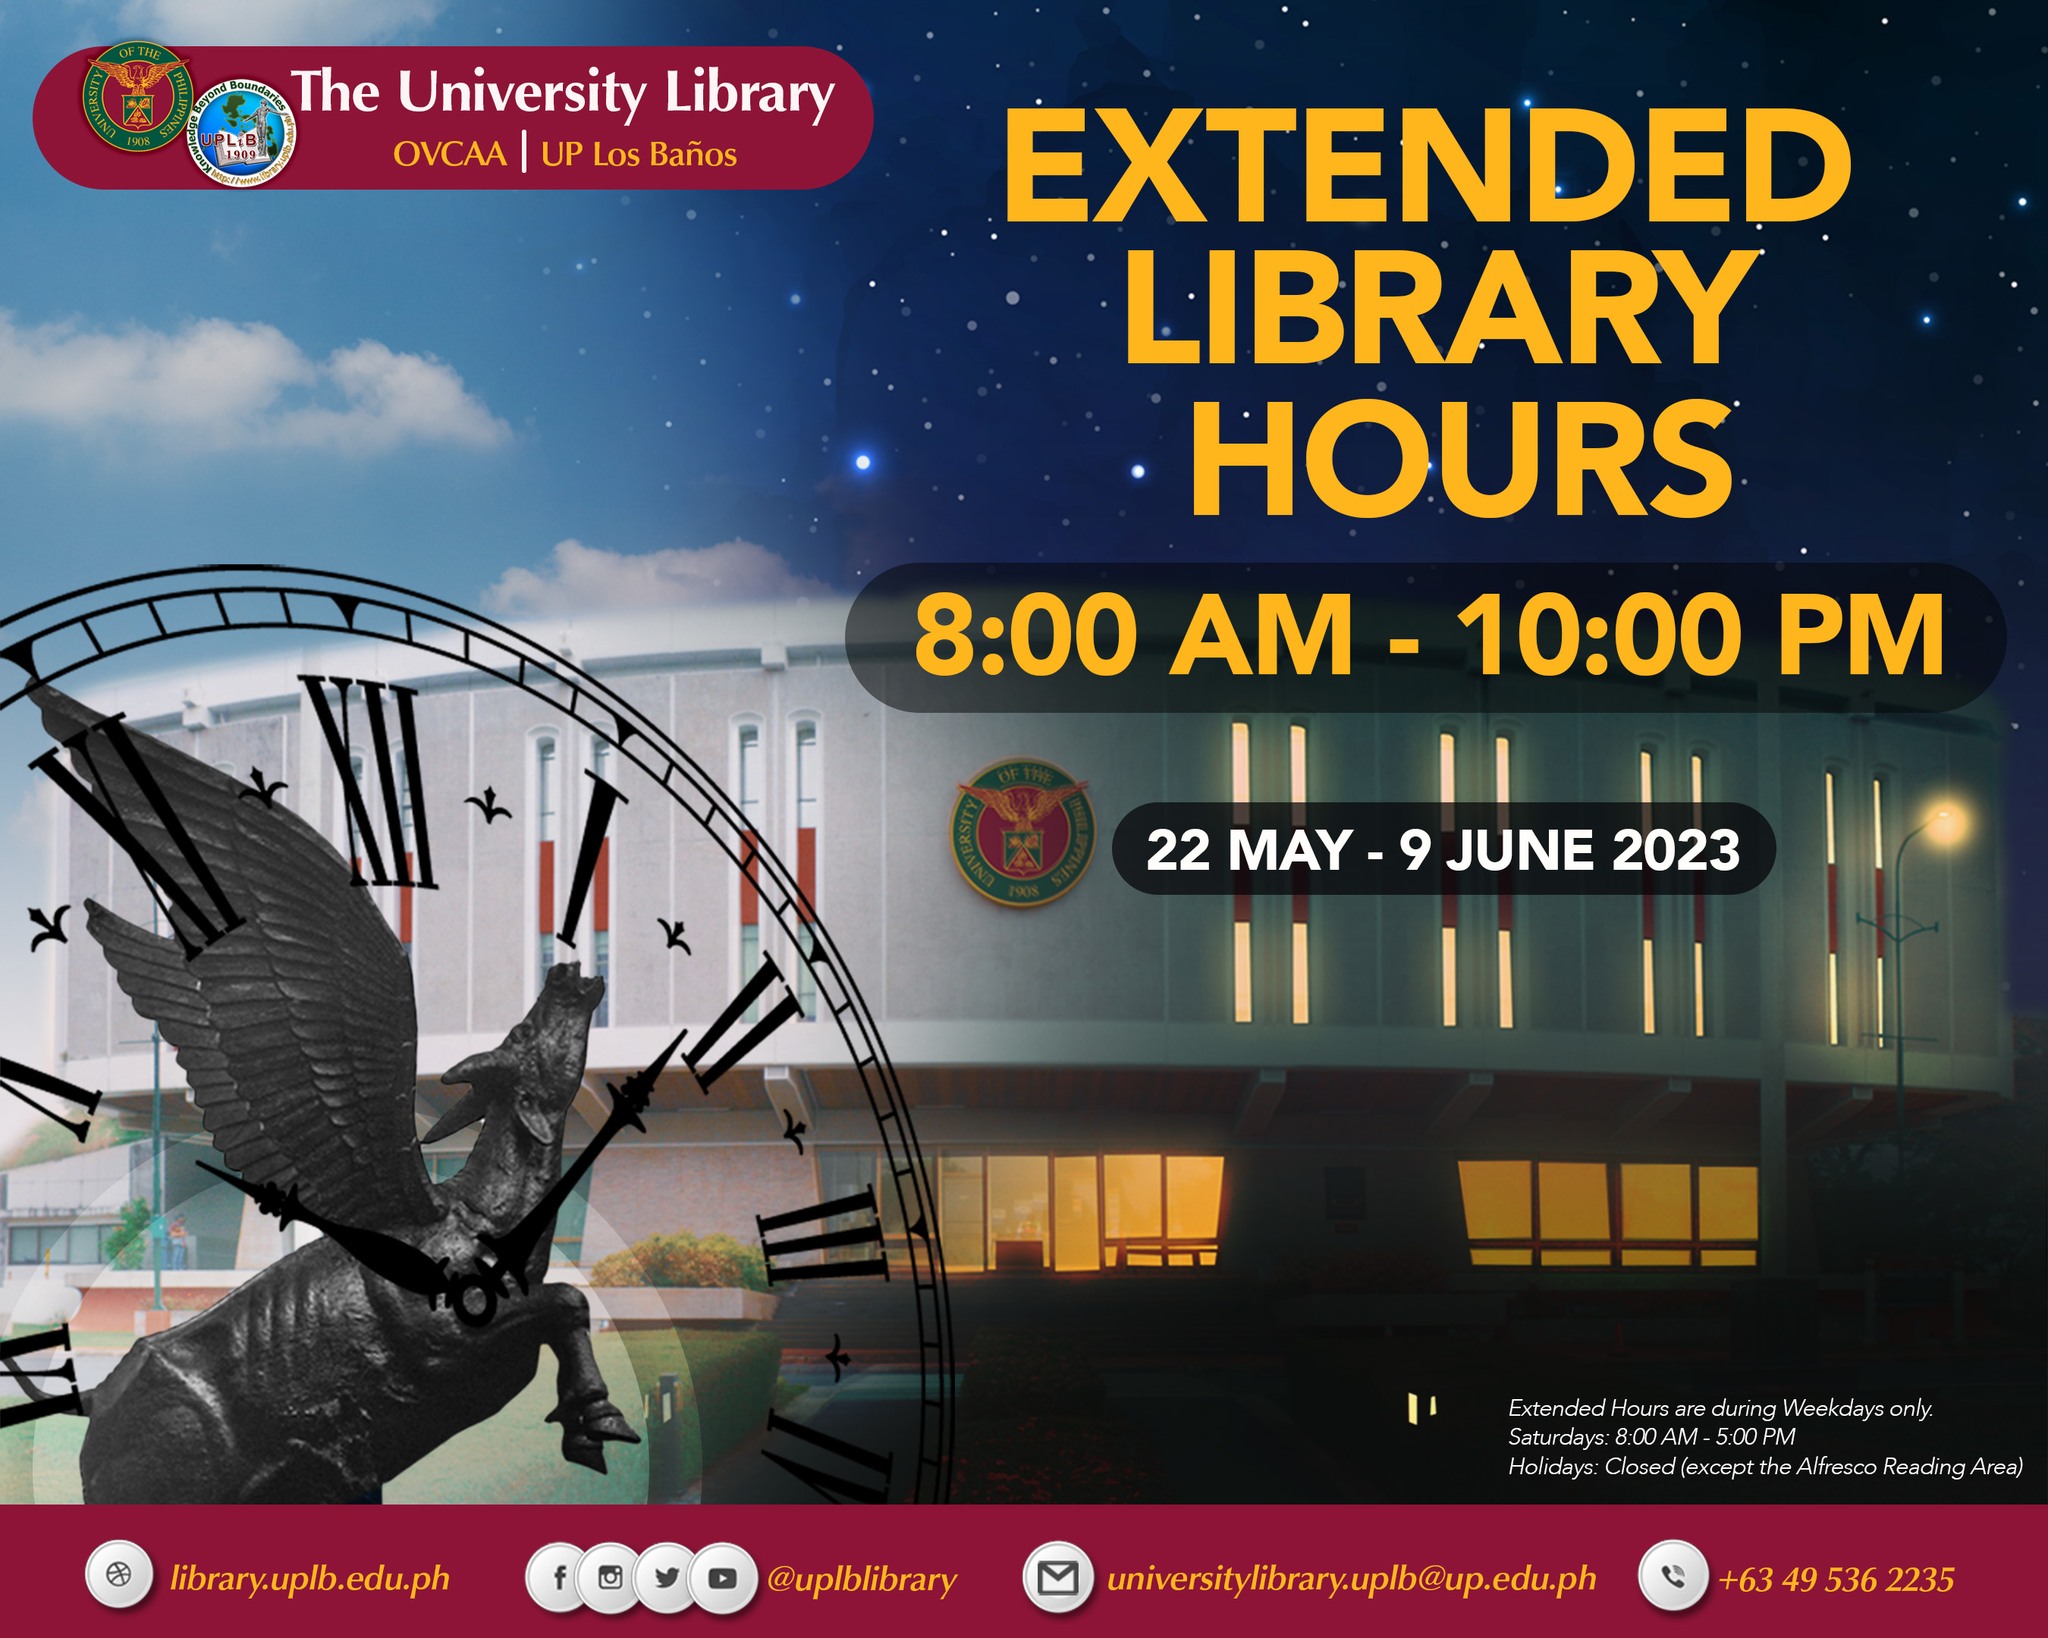 Library Hours Extension!